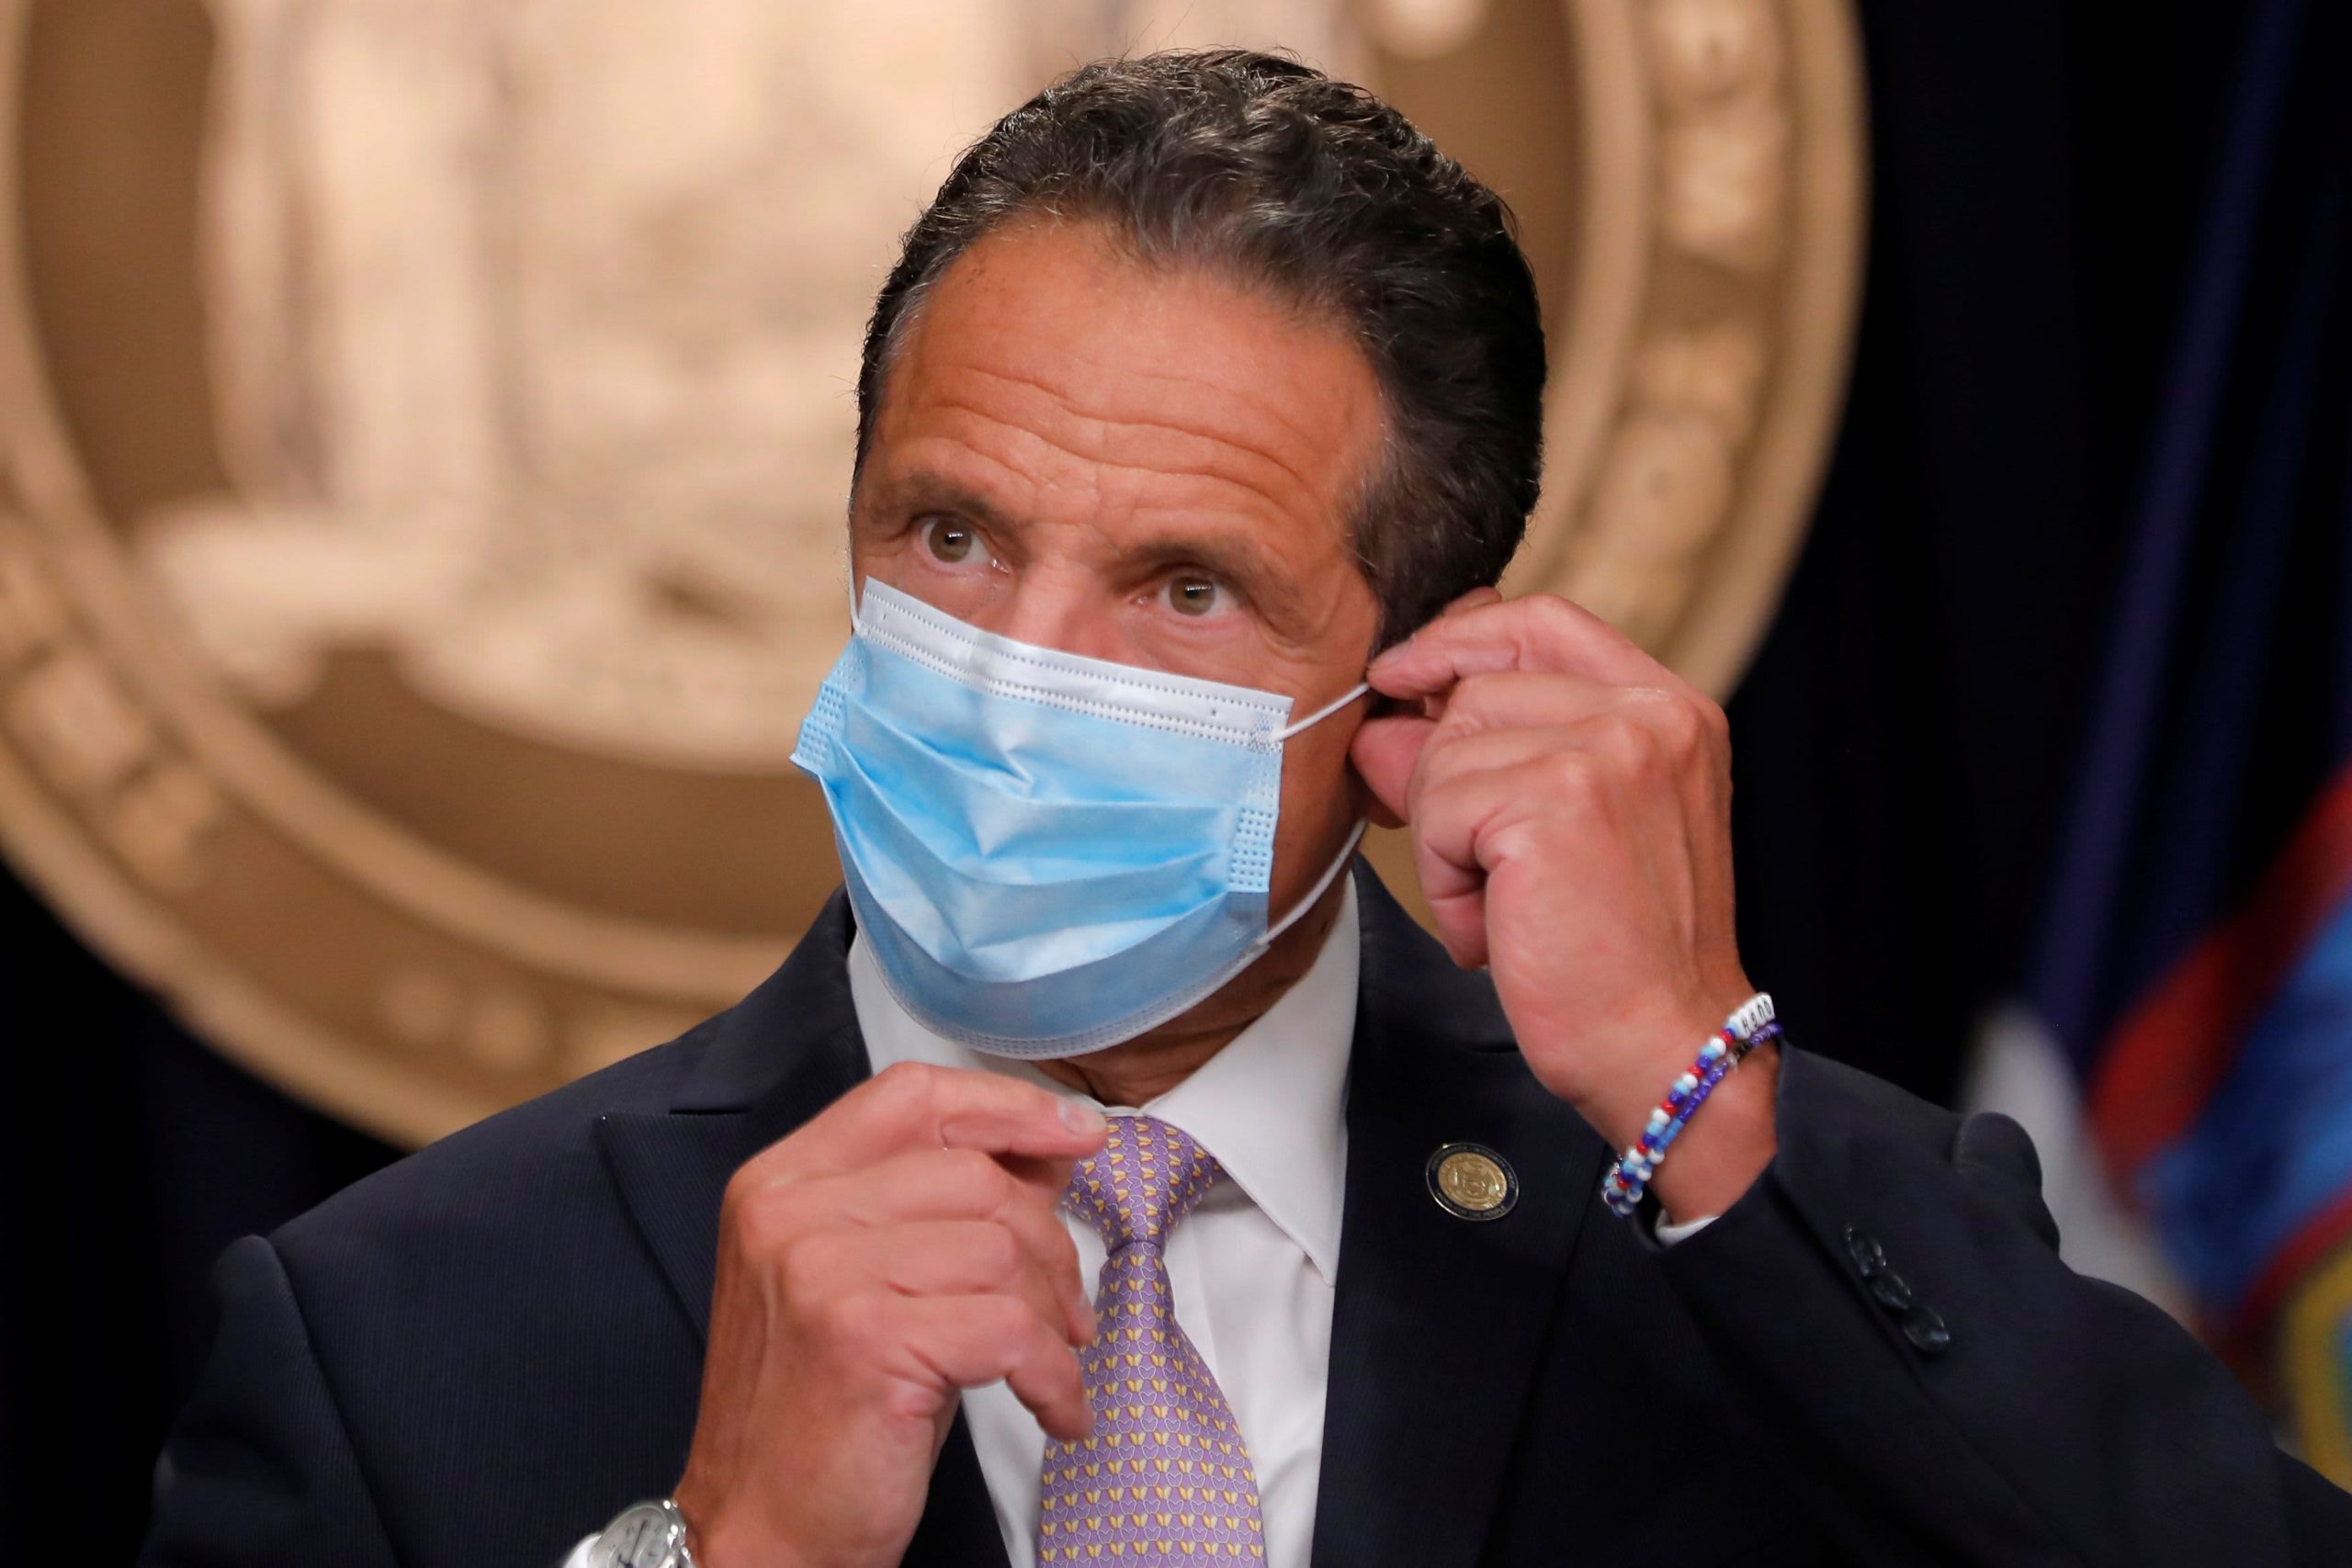 NY Gov. Cuomo briefs the press on Covid pandemic as state distributes vaccines